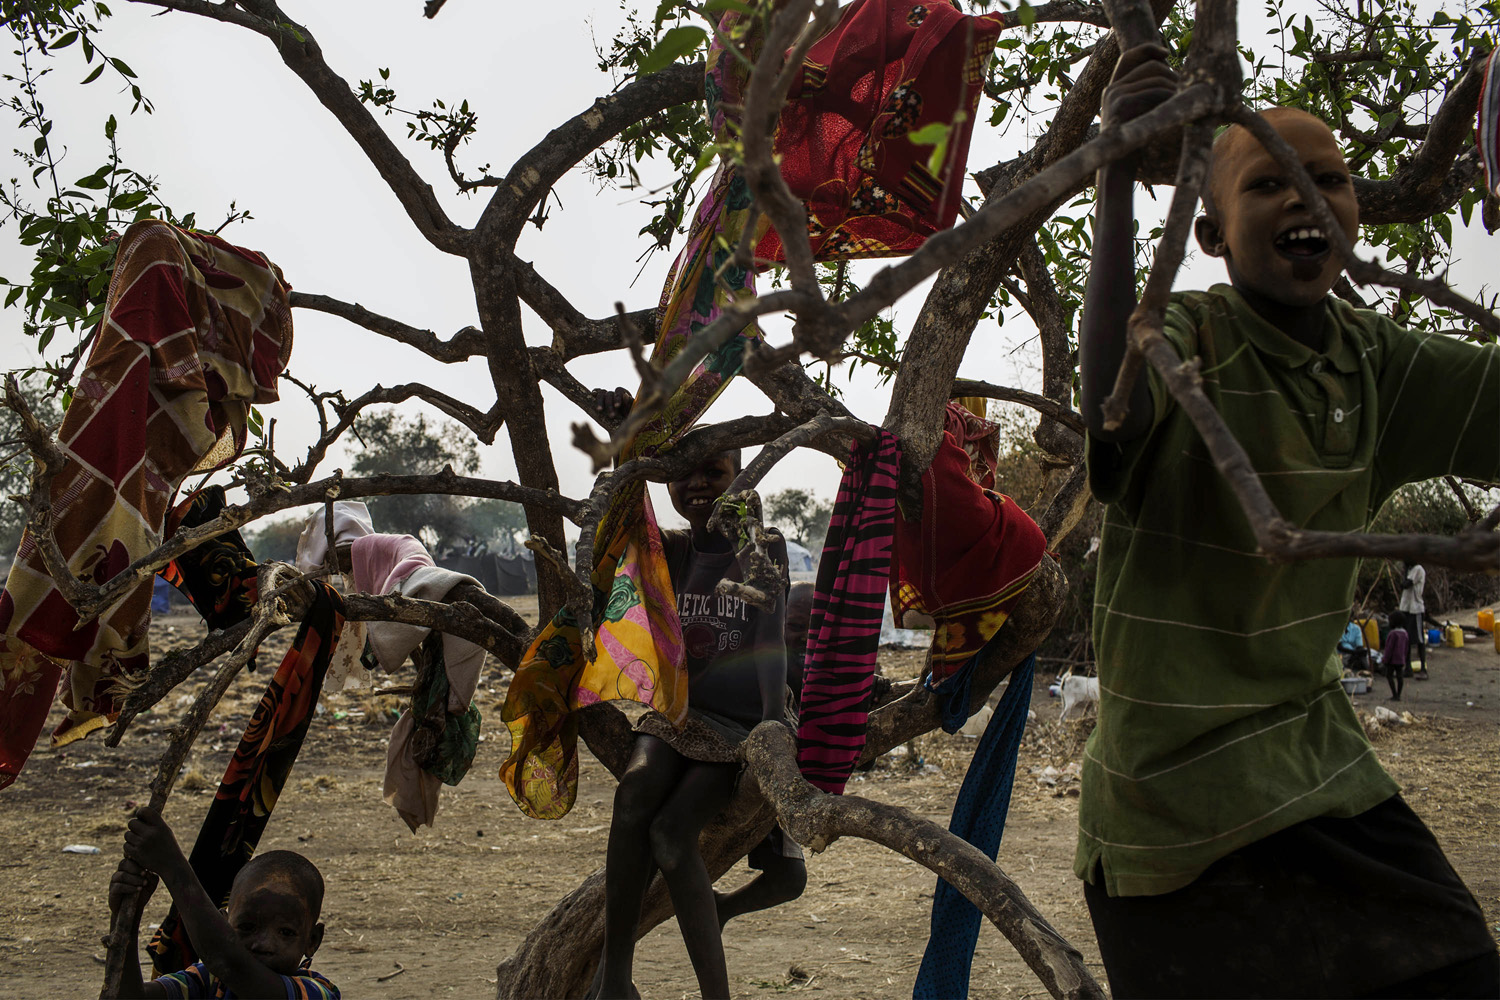 Feb. 7, 2014. Children play in a tree in the temporary camp of South Sudanese Internally Displaced People (IDP's) in Mingkaman.